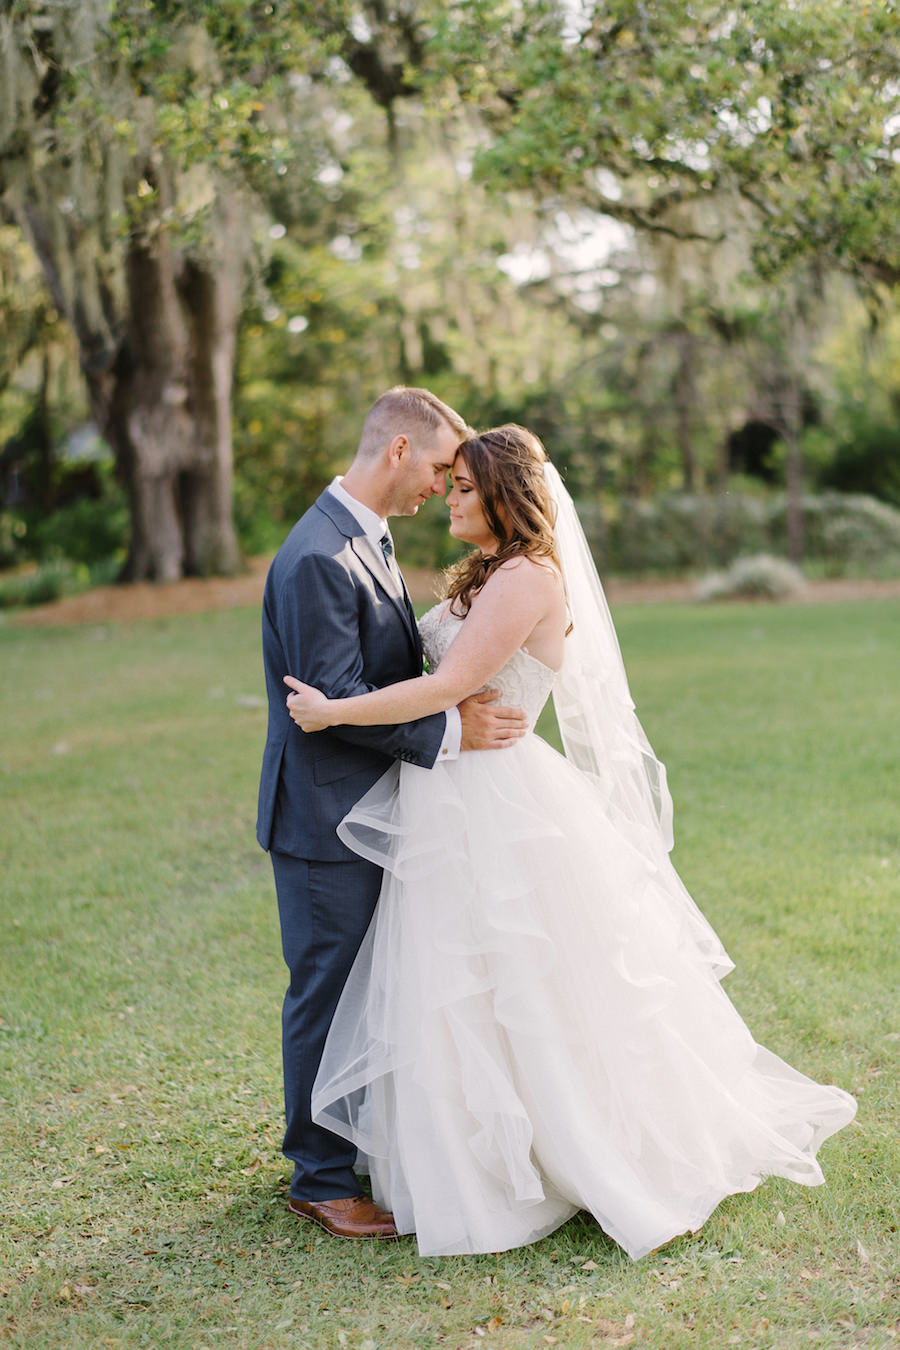 Tampa Bay Bride and Groom Wedding Day Portrait in White Essence of Australia Tulle Wedding Gown and Navy Blue Suit